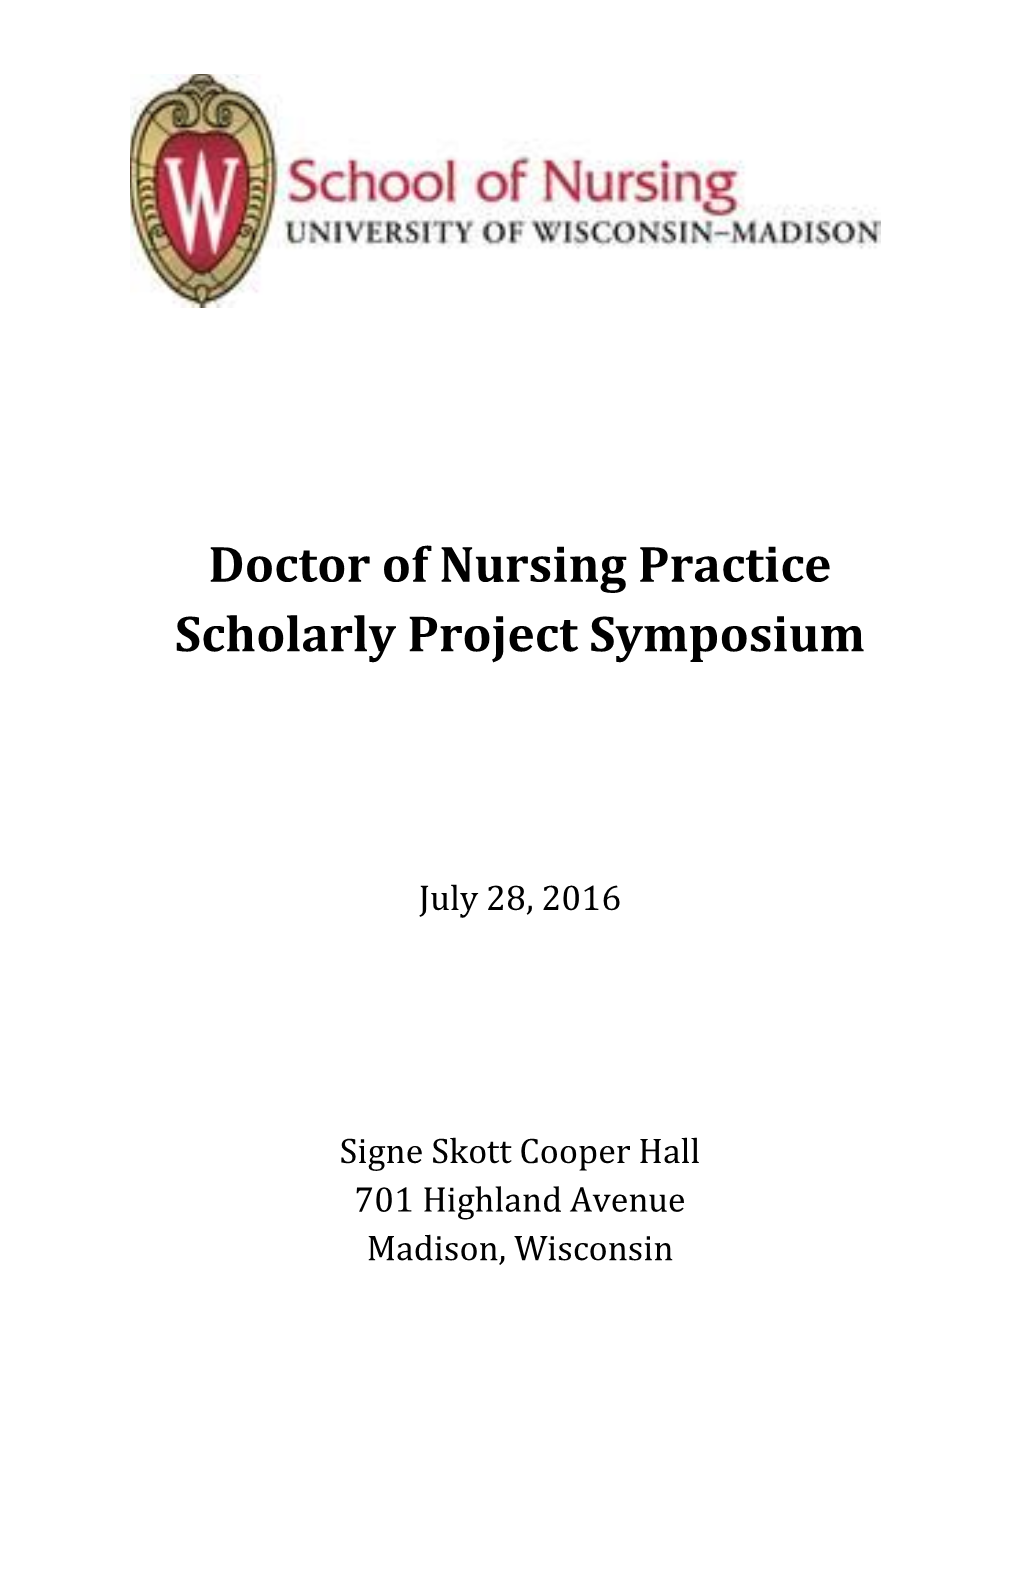 Doctor of Nursing Practice Scholarly Project Symposium